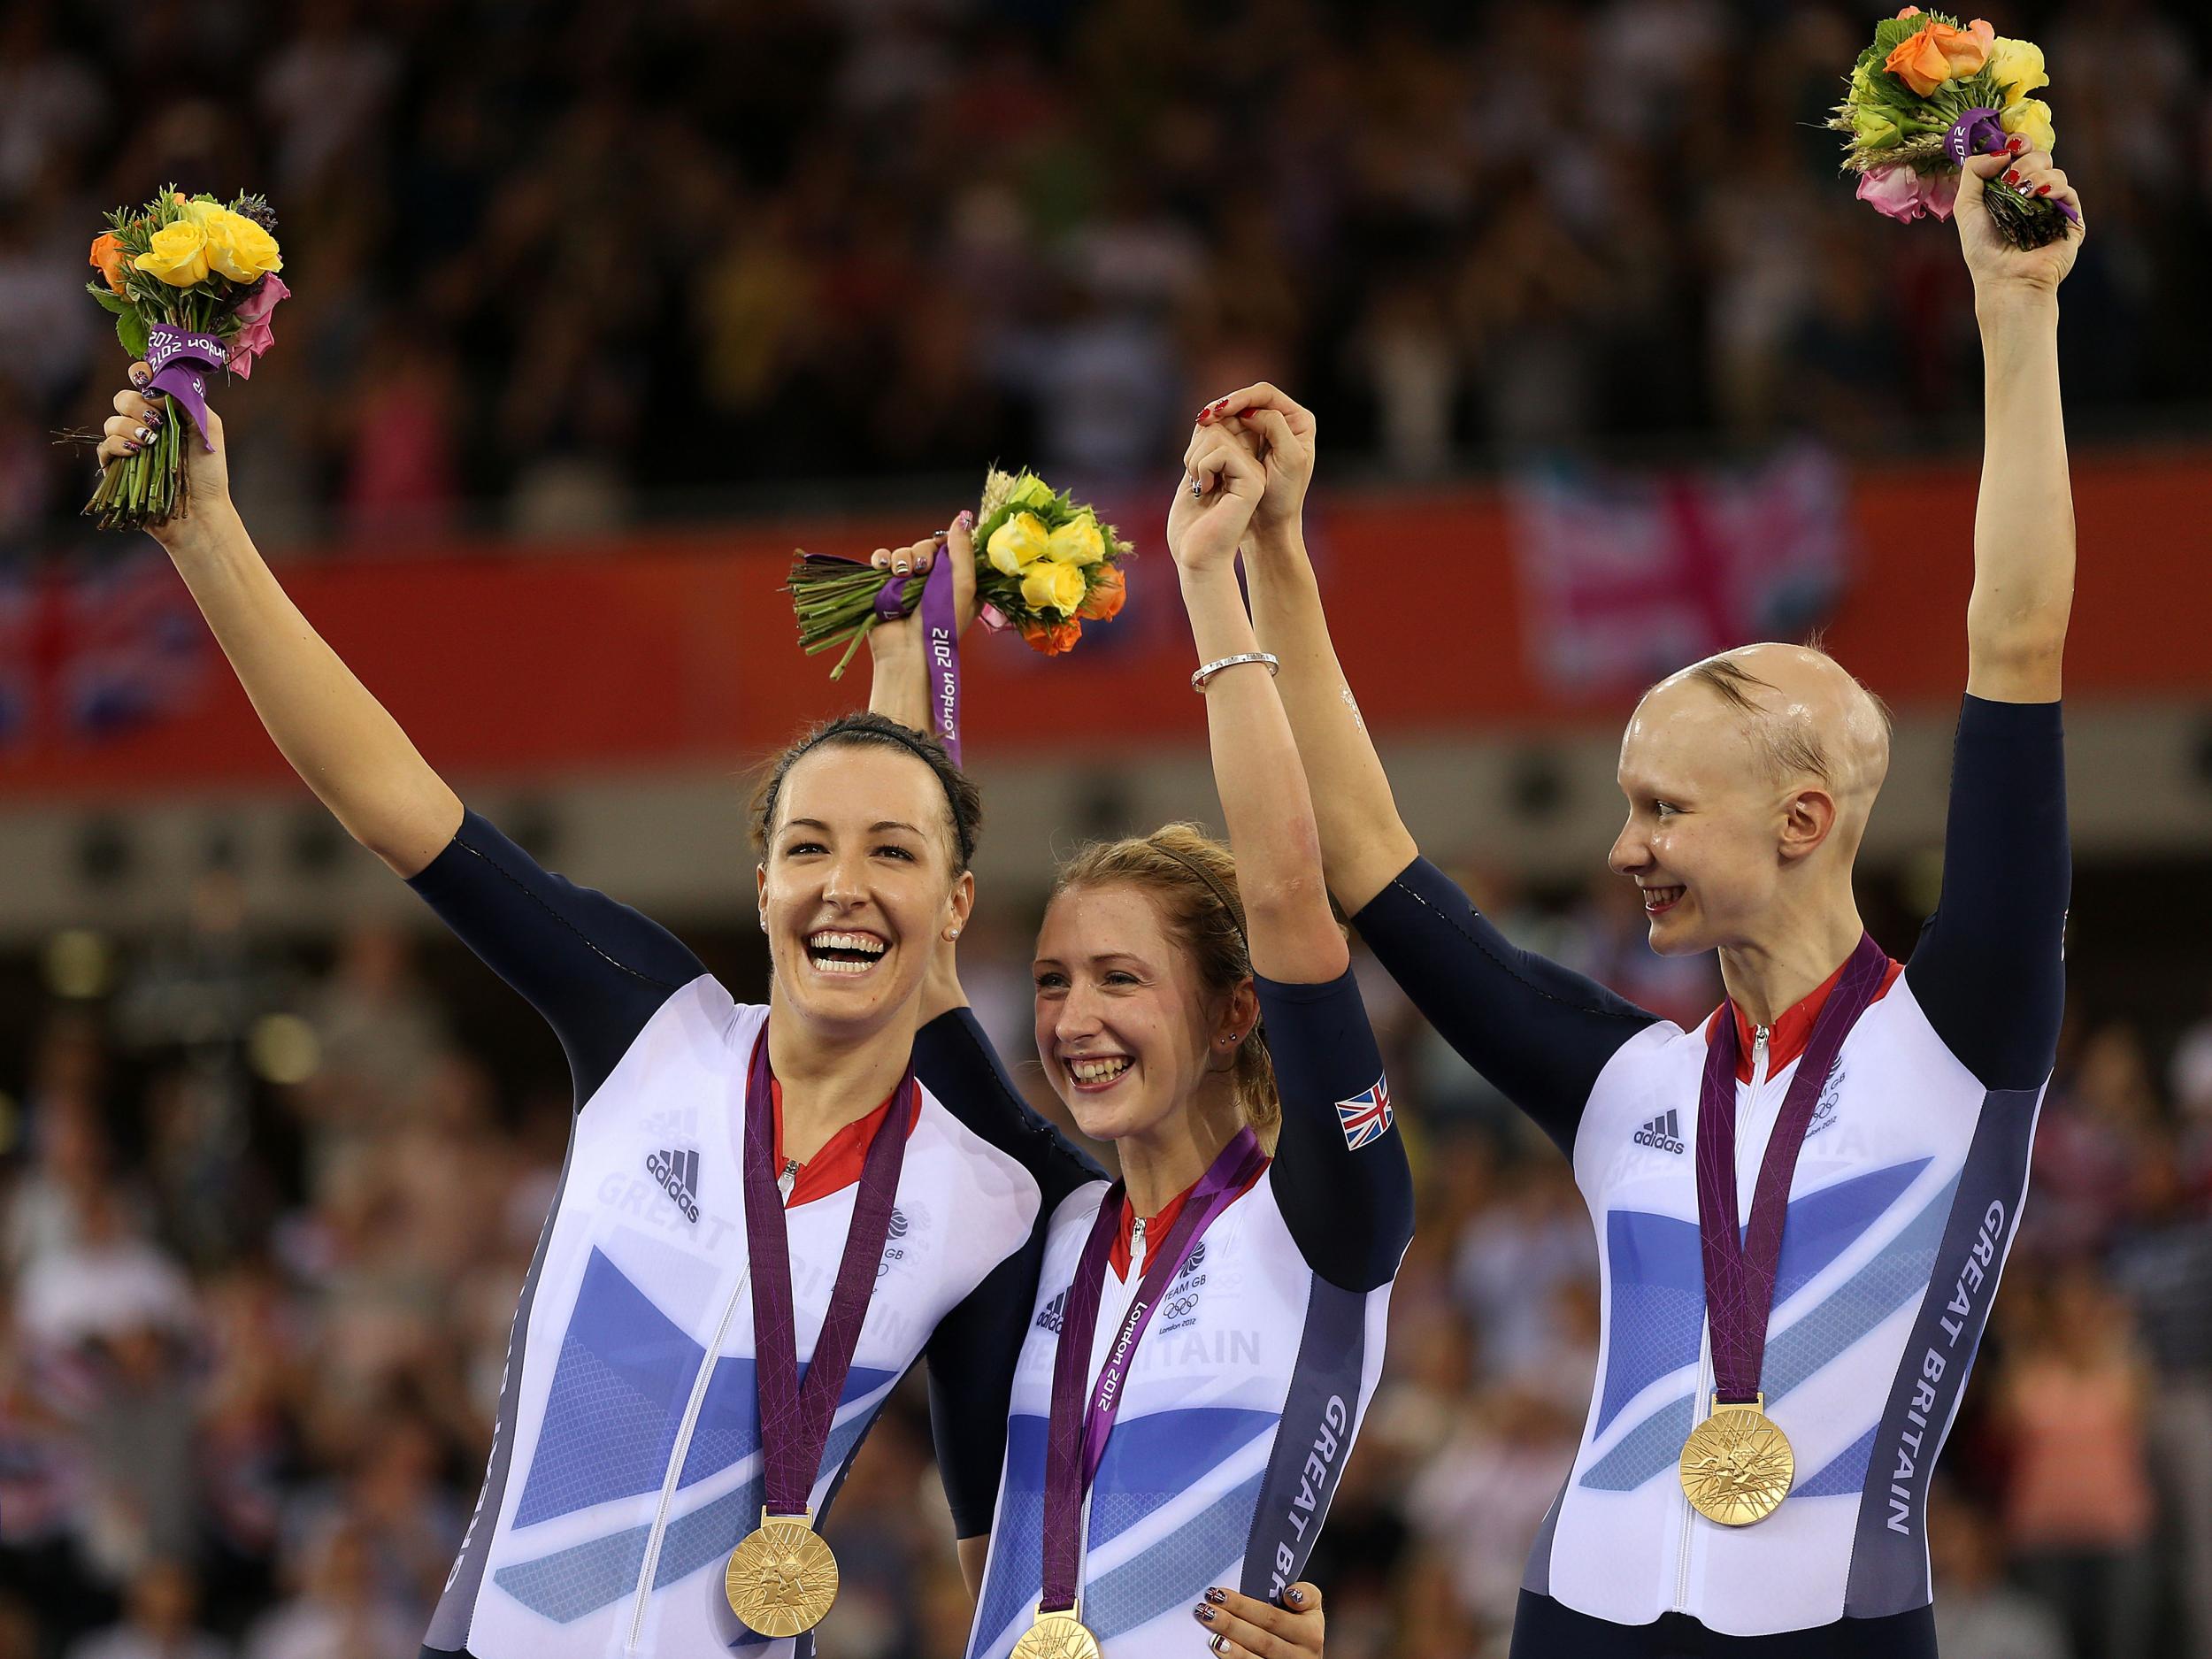 Dani Rowe (L) won a gold medal in the team pursuit in the 2012 Olympics